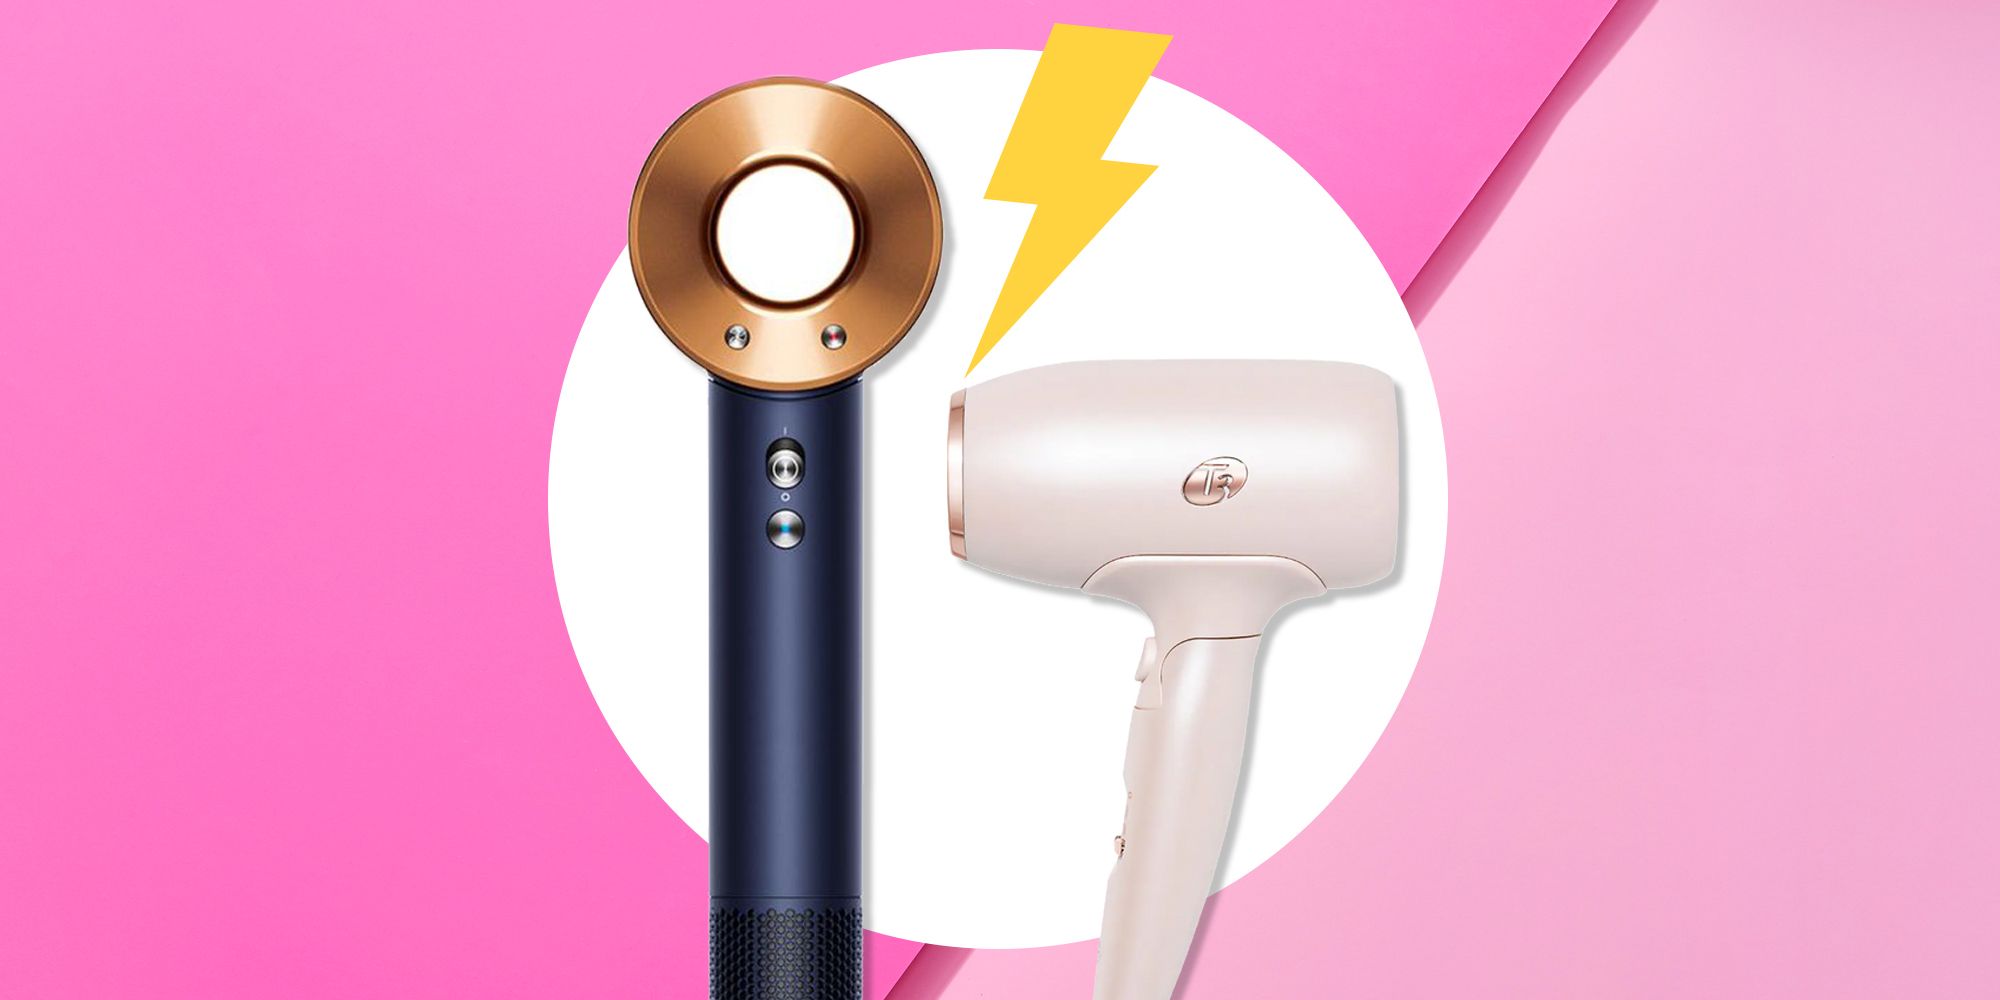 The Best Hair Dryer Will Lock Your Style Without Damage